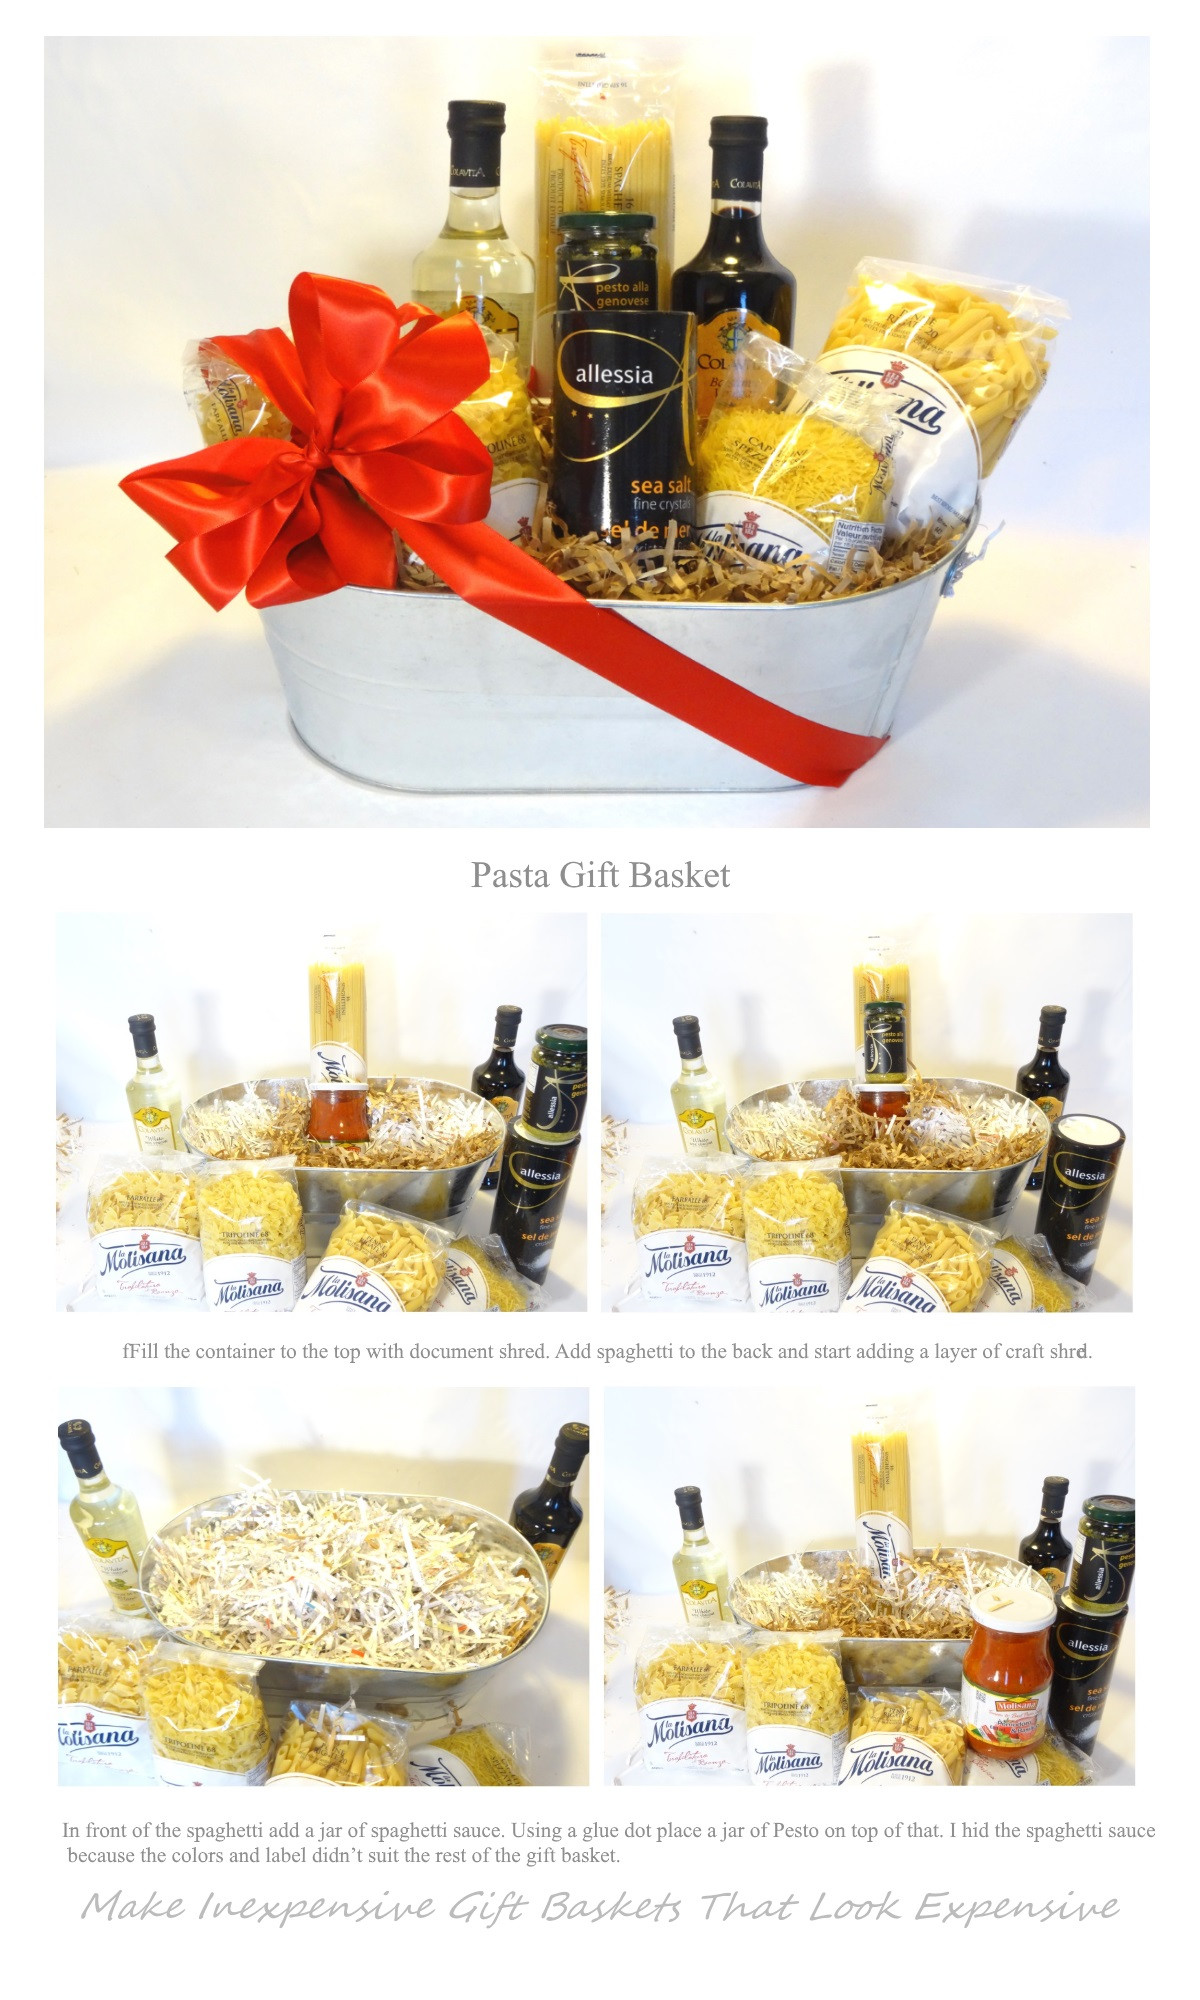 Making Gift Baskets Ideas
 Make Inexpensive Gift Baskets that Look Expensive Book